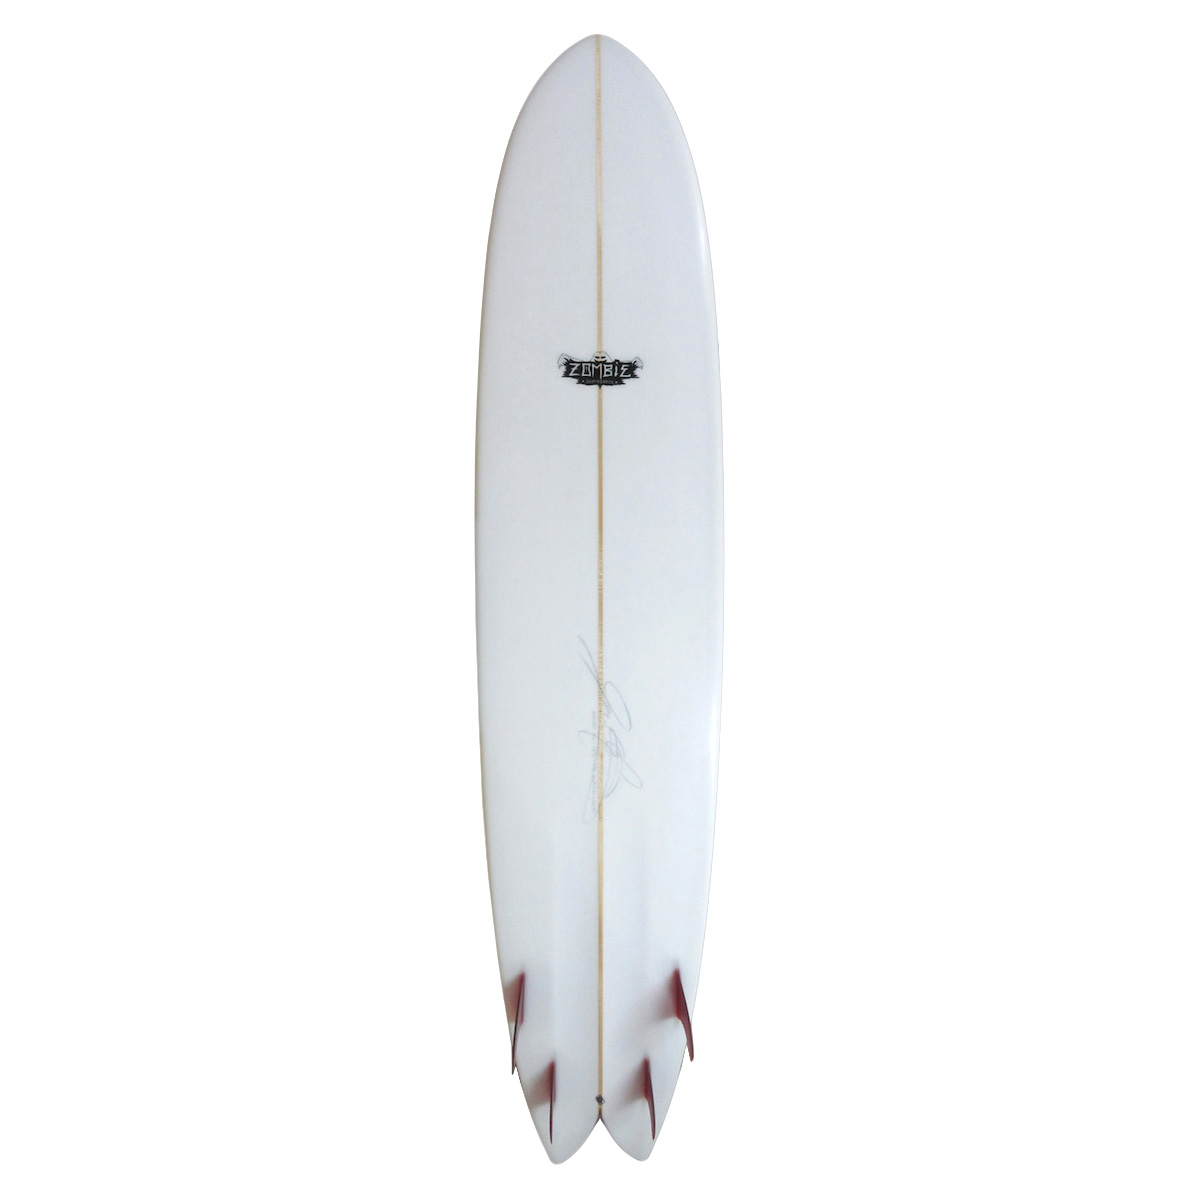 ZOMBIE SURFBOARDS  / Custom BIG FISH 9'0 Shaped by Oba